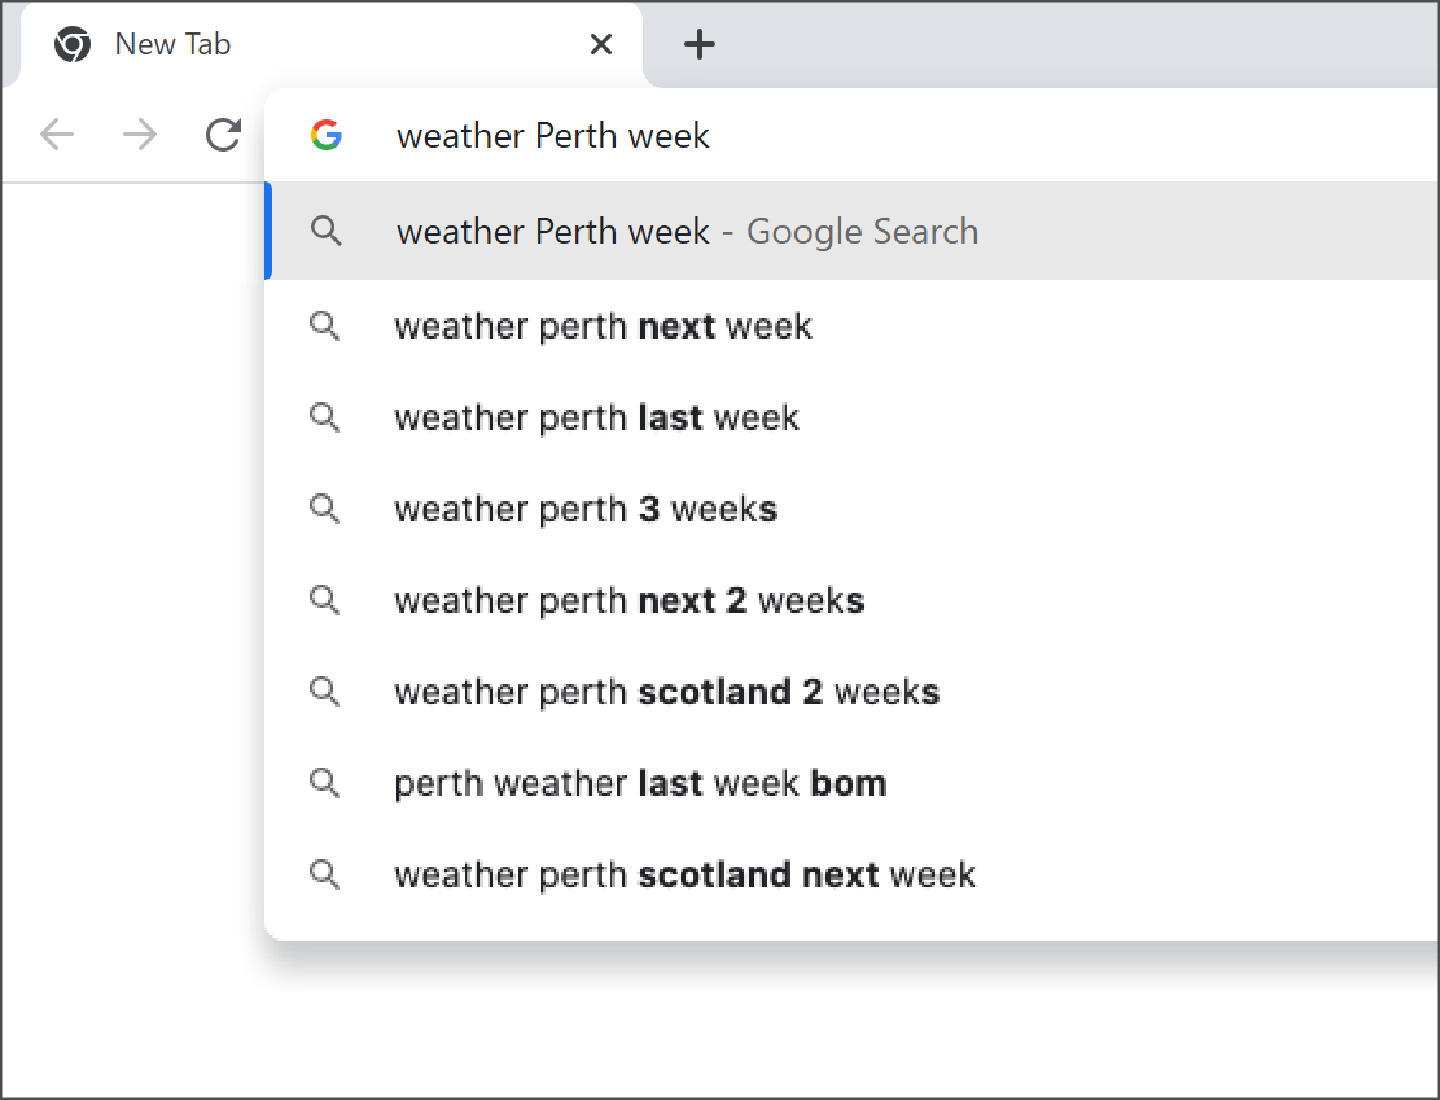 A list of suggestions that appear when we start typing in a search for weather Perth week.